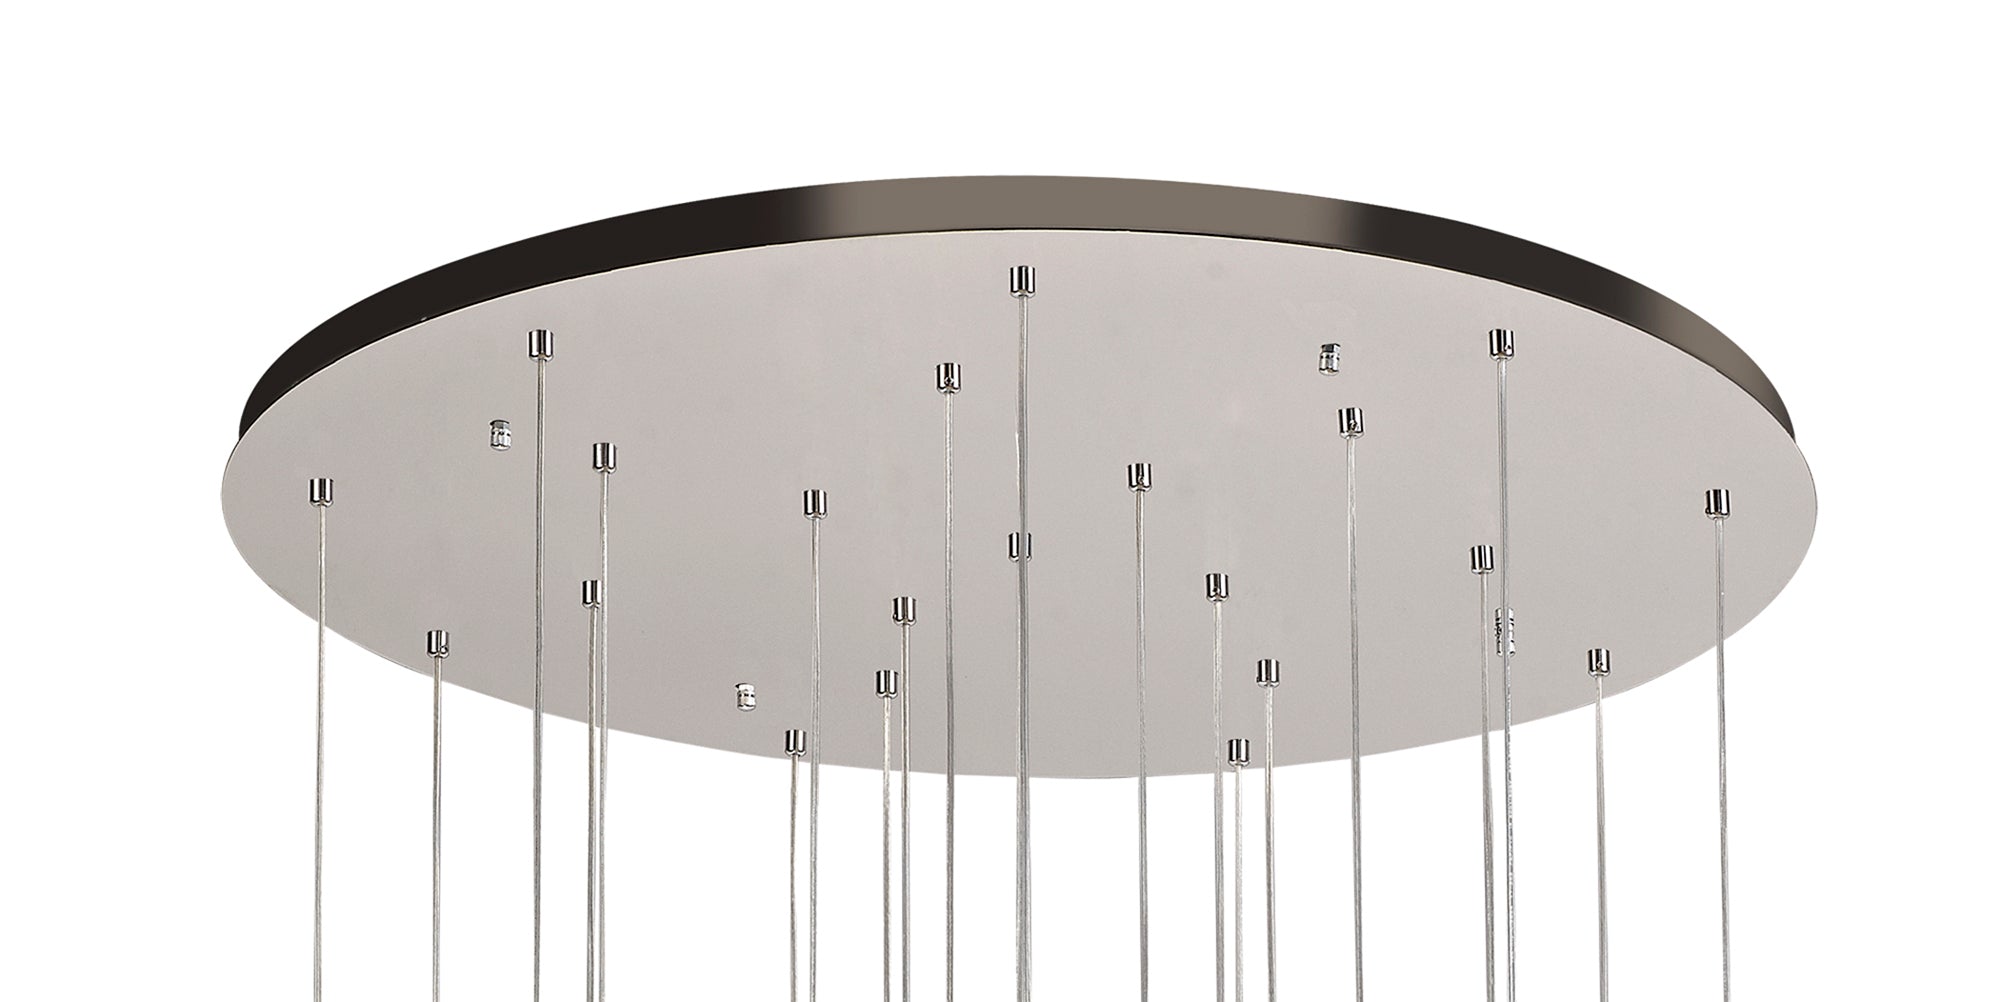 Asquith Pendant 5m, 21 x 4.5W LED, 3000K, 3360lm, Polished Chrome, 3yrs Warranty Item Weight: 25.8kg